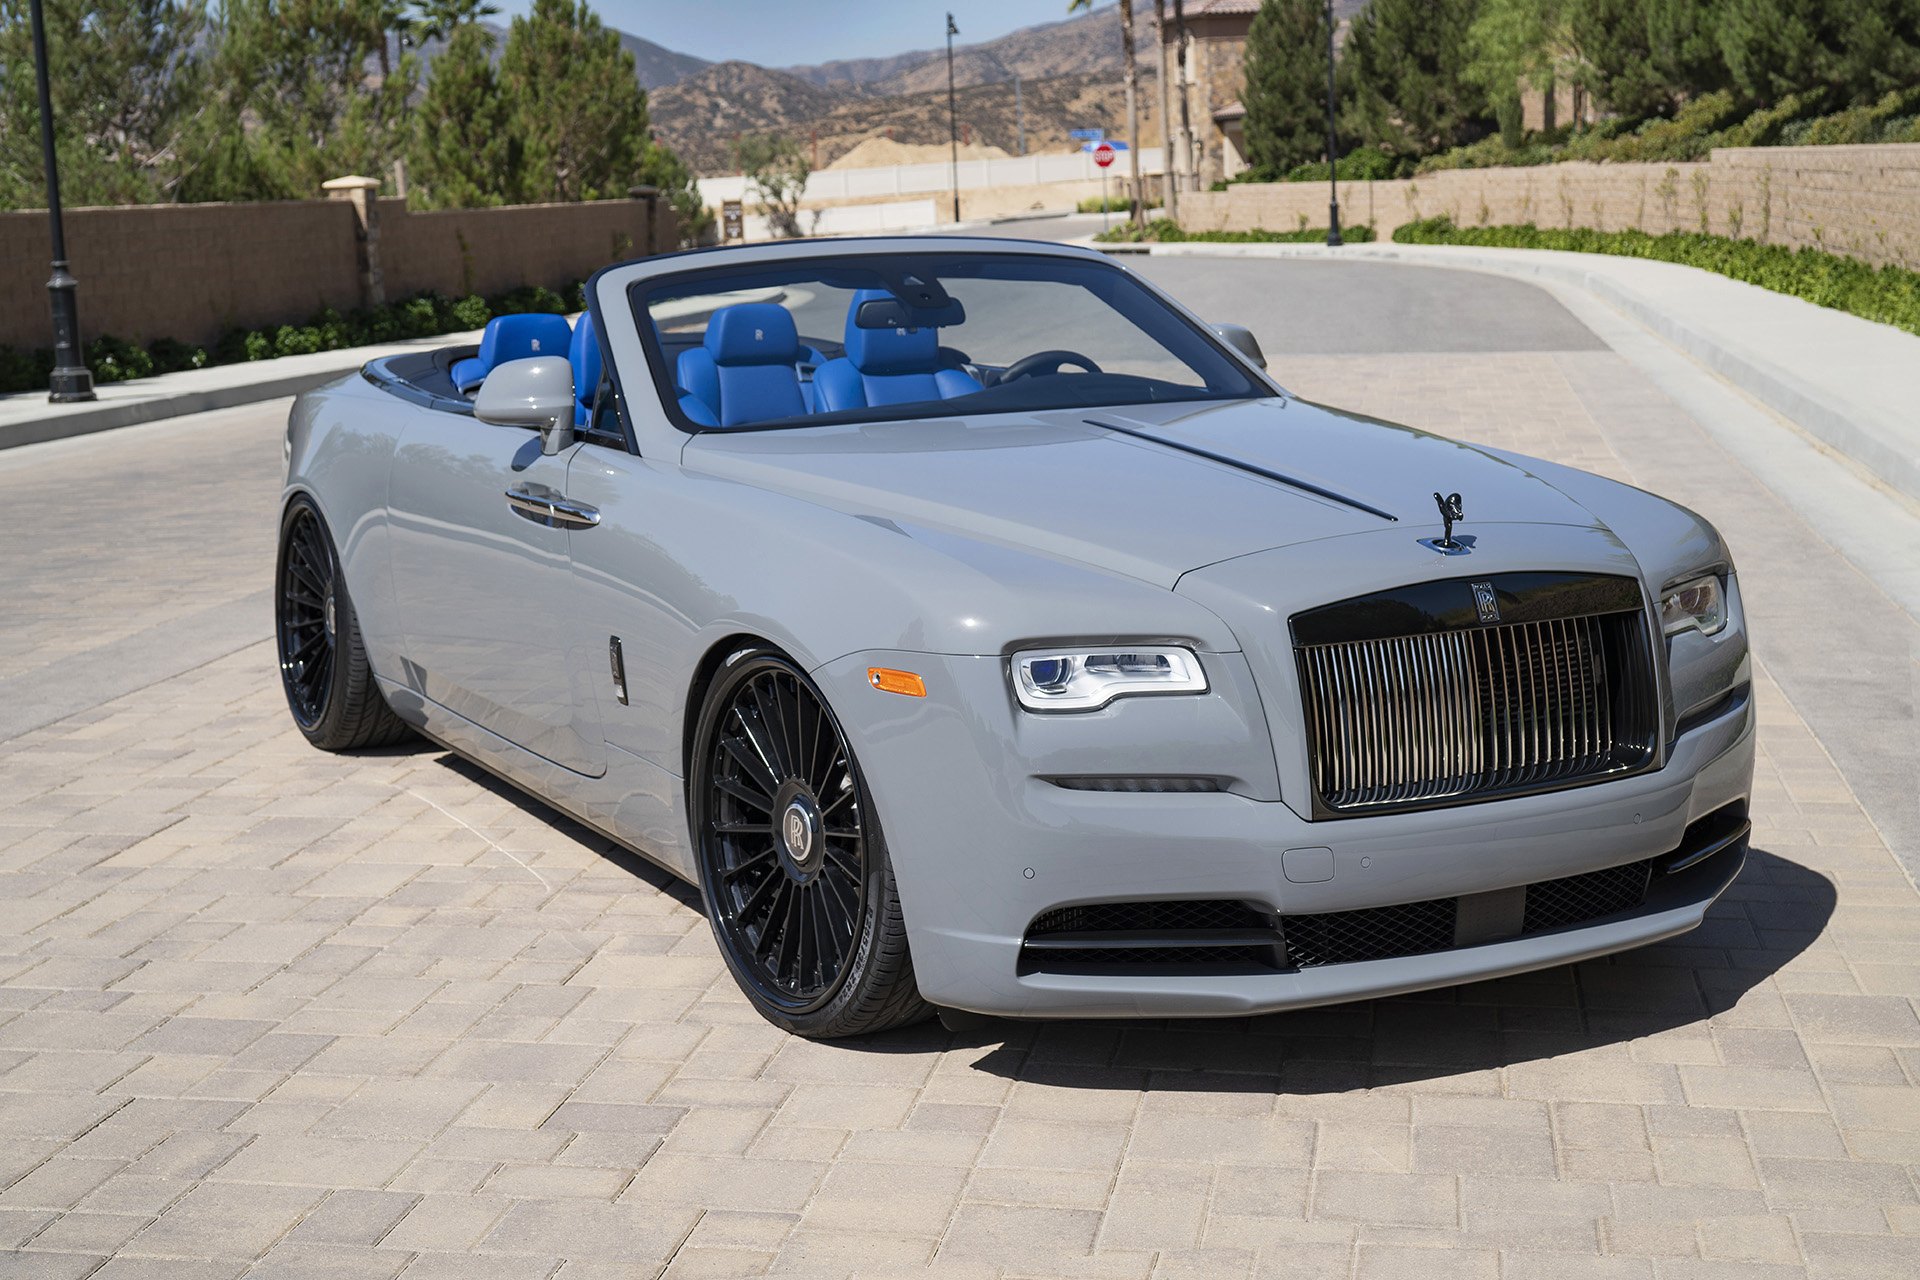 Gray Convertible Rolls Royce Dawn with Custom Front Bumper - Photo by Forgiato